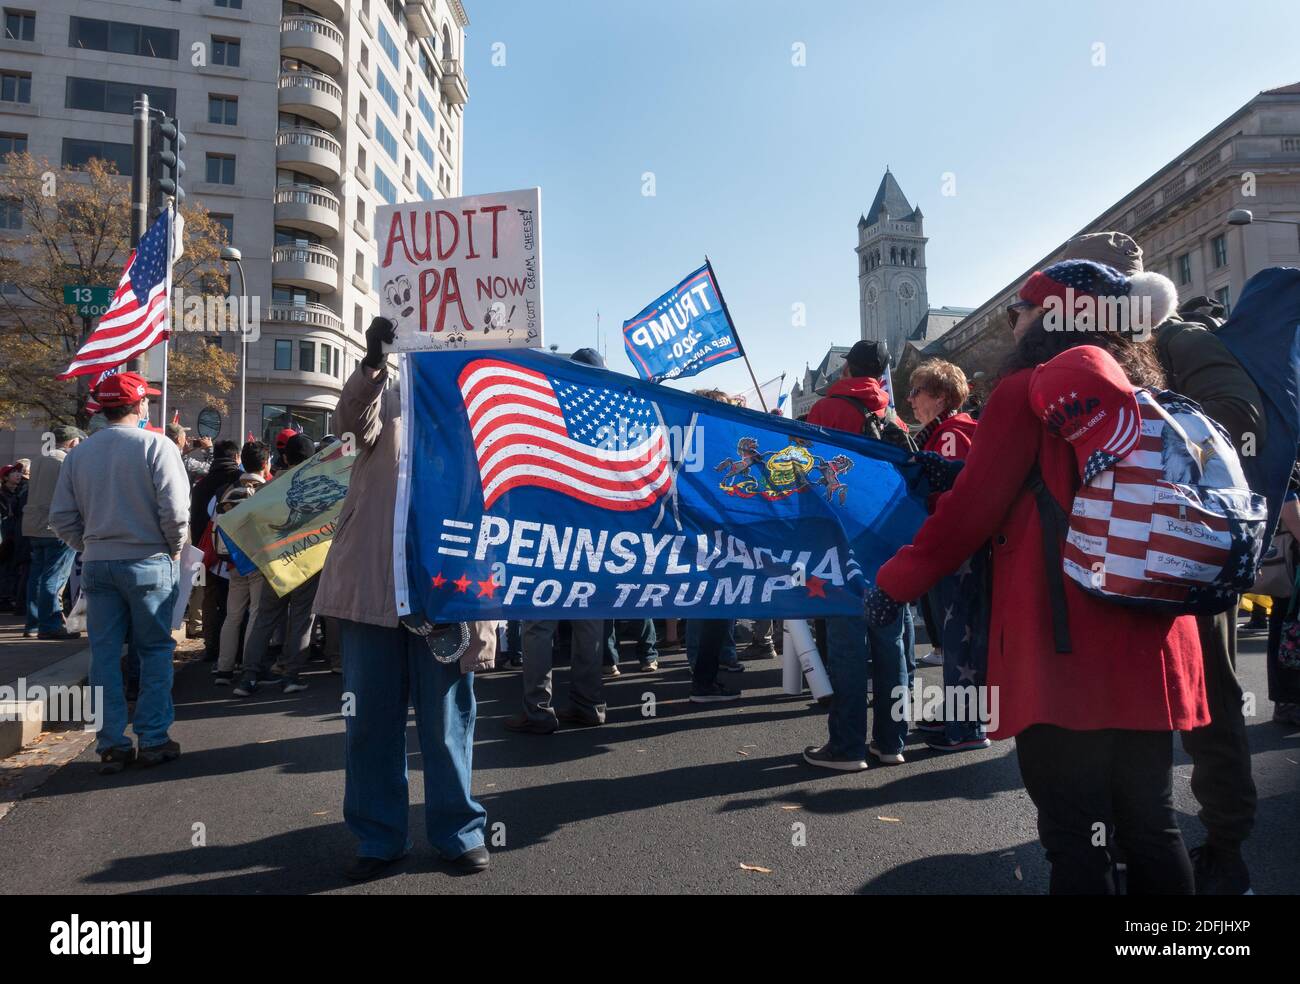 WASHINGTON, DC - NOV. 14, 2020: With Trump hotel in background, Trump supporters at Freedom Plaza rally in support of President Donald Trump, who refuses to concede the election. Event was organized by 'Women for America First,' 'Stop the Steal' and the 'Million MAGA March.' Stock Photo